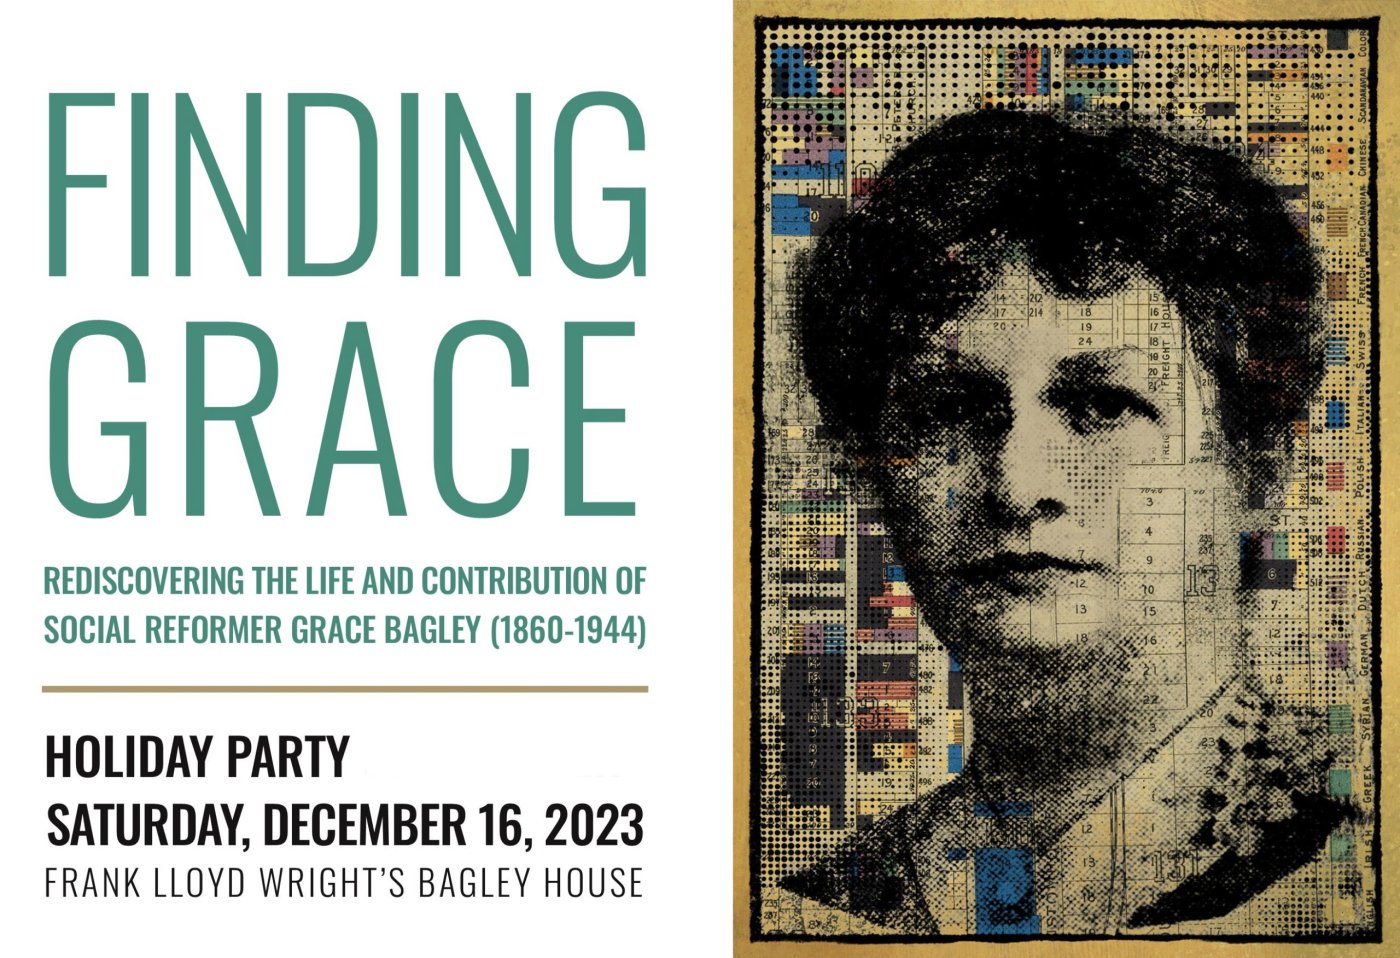 Postcard that reads: Finding Grace Rediscovering the Life and Contribution of Social Reformer Grace Bagley (1860-1944) Holiday Party, Saturday, December 16, 2023 Frank Lloyd Wright's Bagley House